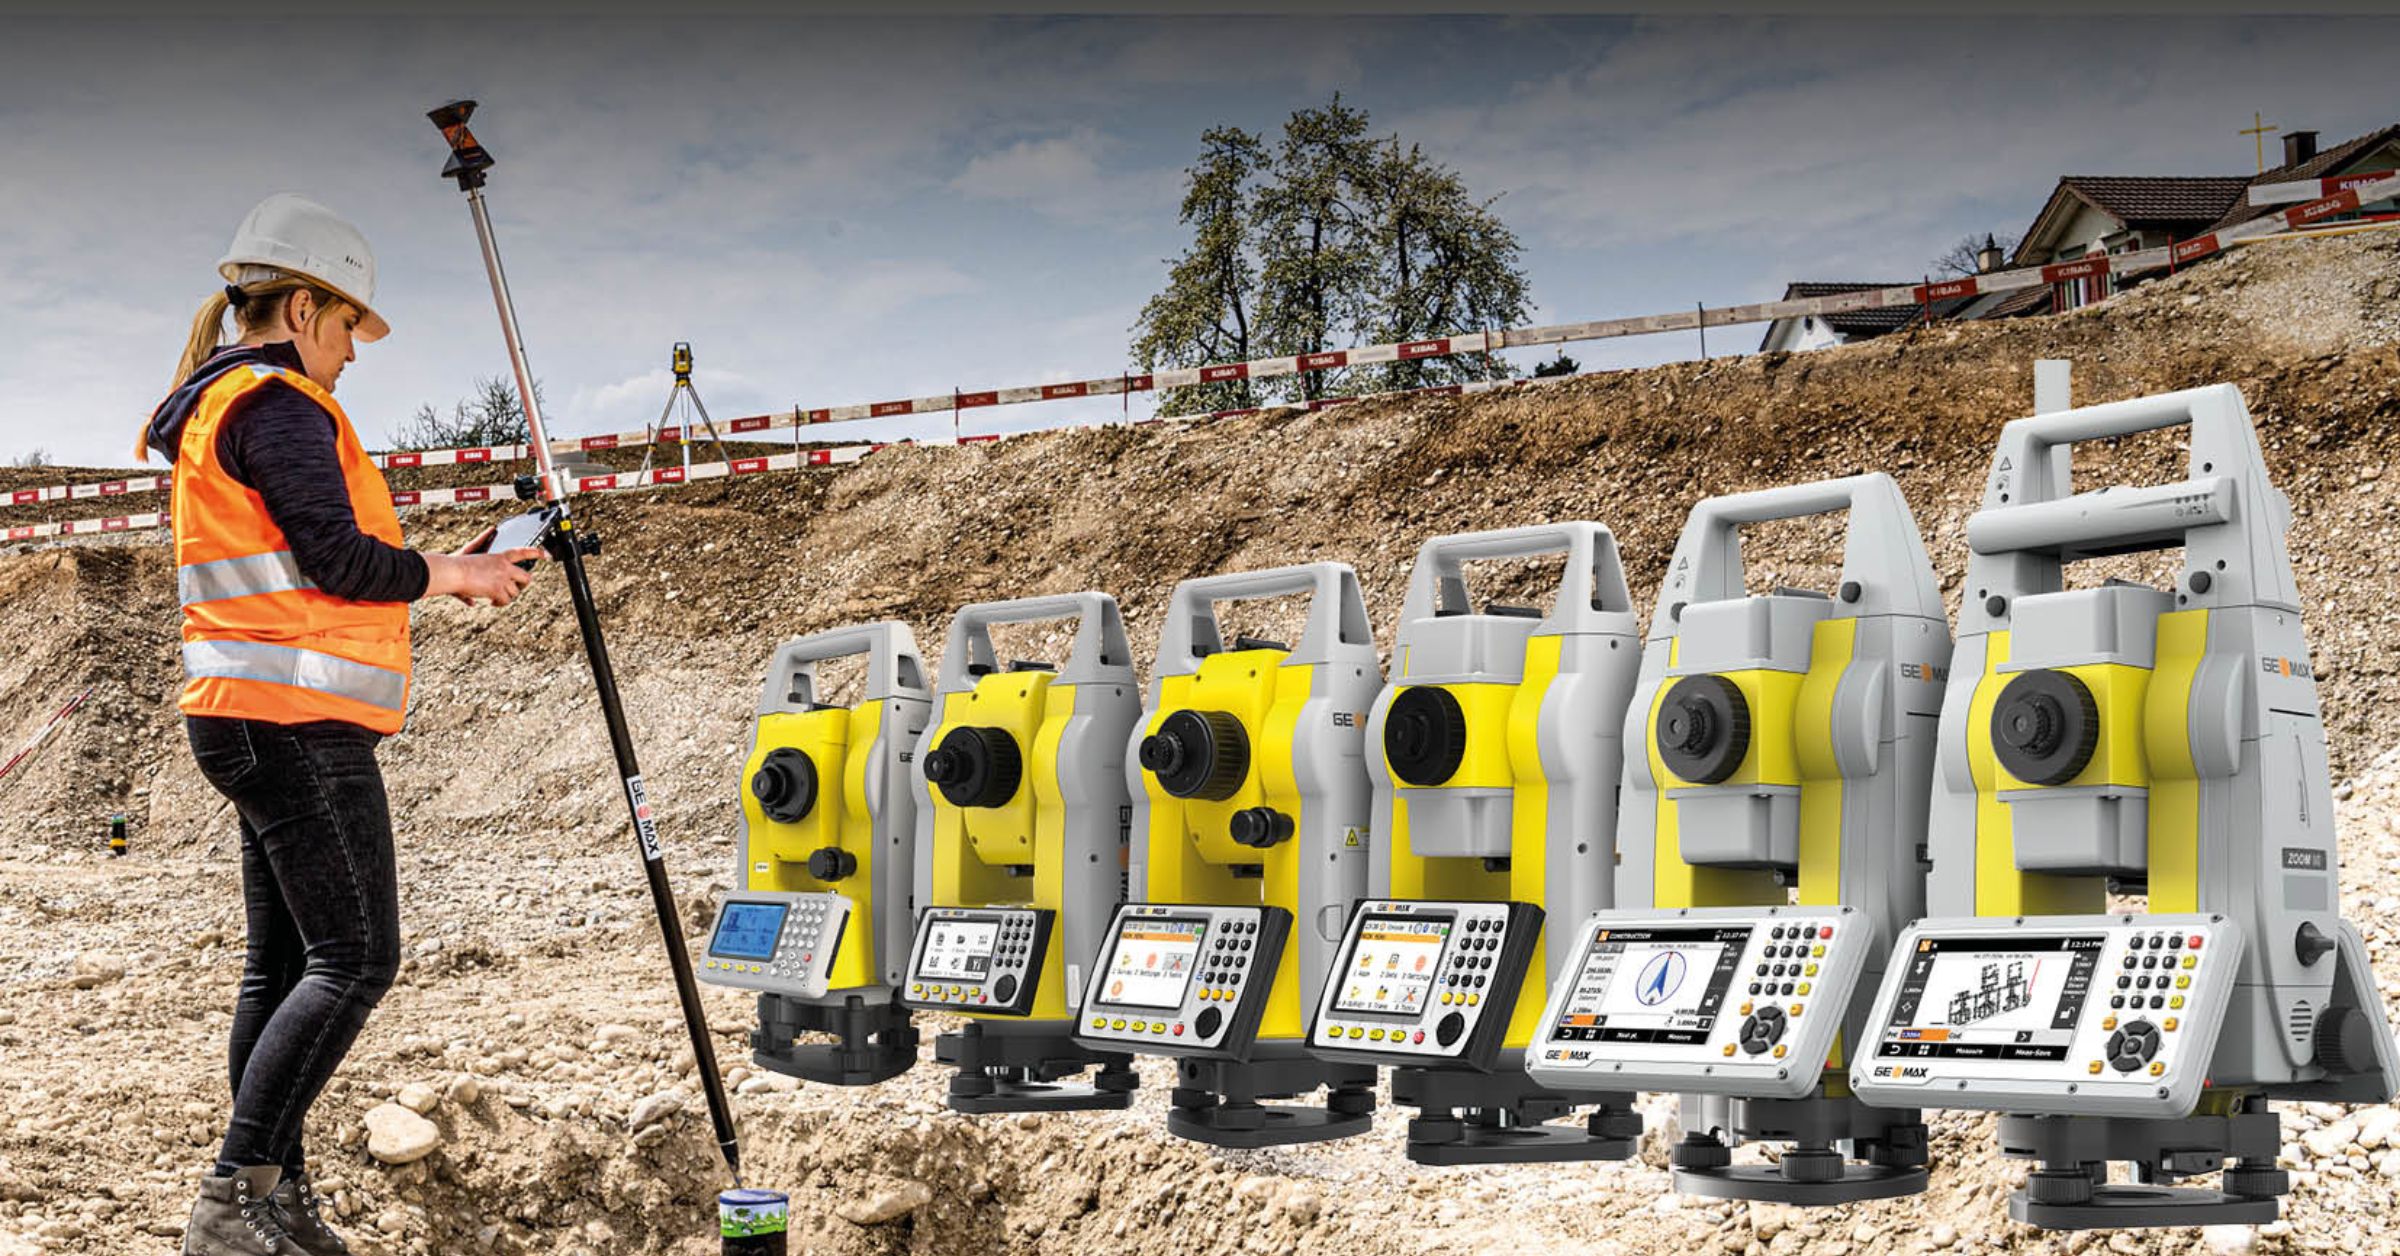 GeoMax Zoom95 Robotic Total Stations